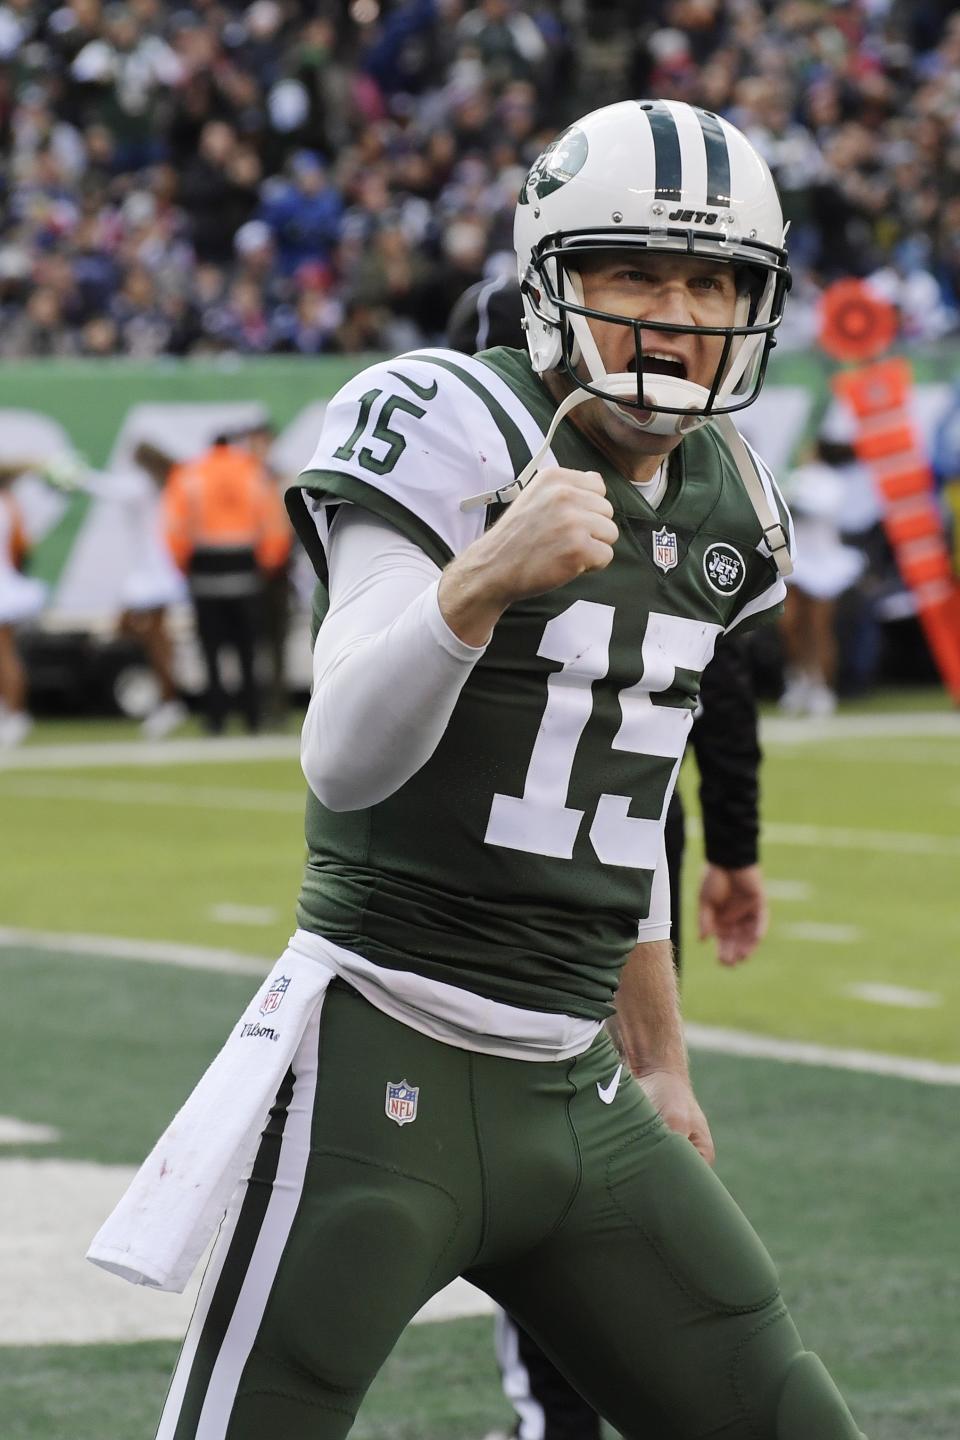 New York Jets quarterback Josh McCown (15) celebrates after throwing a touchdown pass to Jermaine Kearse during the first half of an NFL football game against the New England Patriots Sunday, Nov. 25, 2018, in East Rutherford, N.J. (AP Photo/Bill Kostroun)